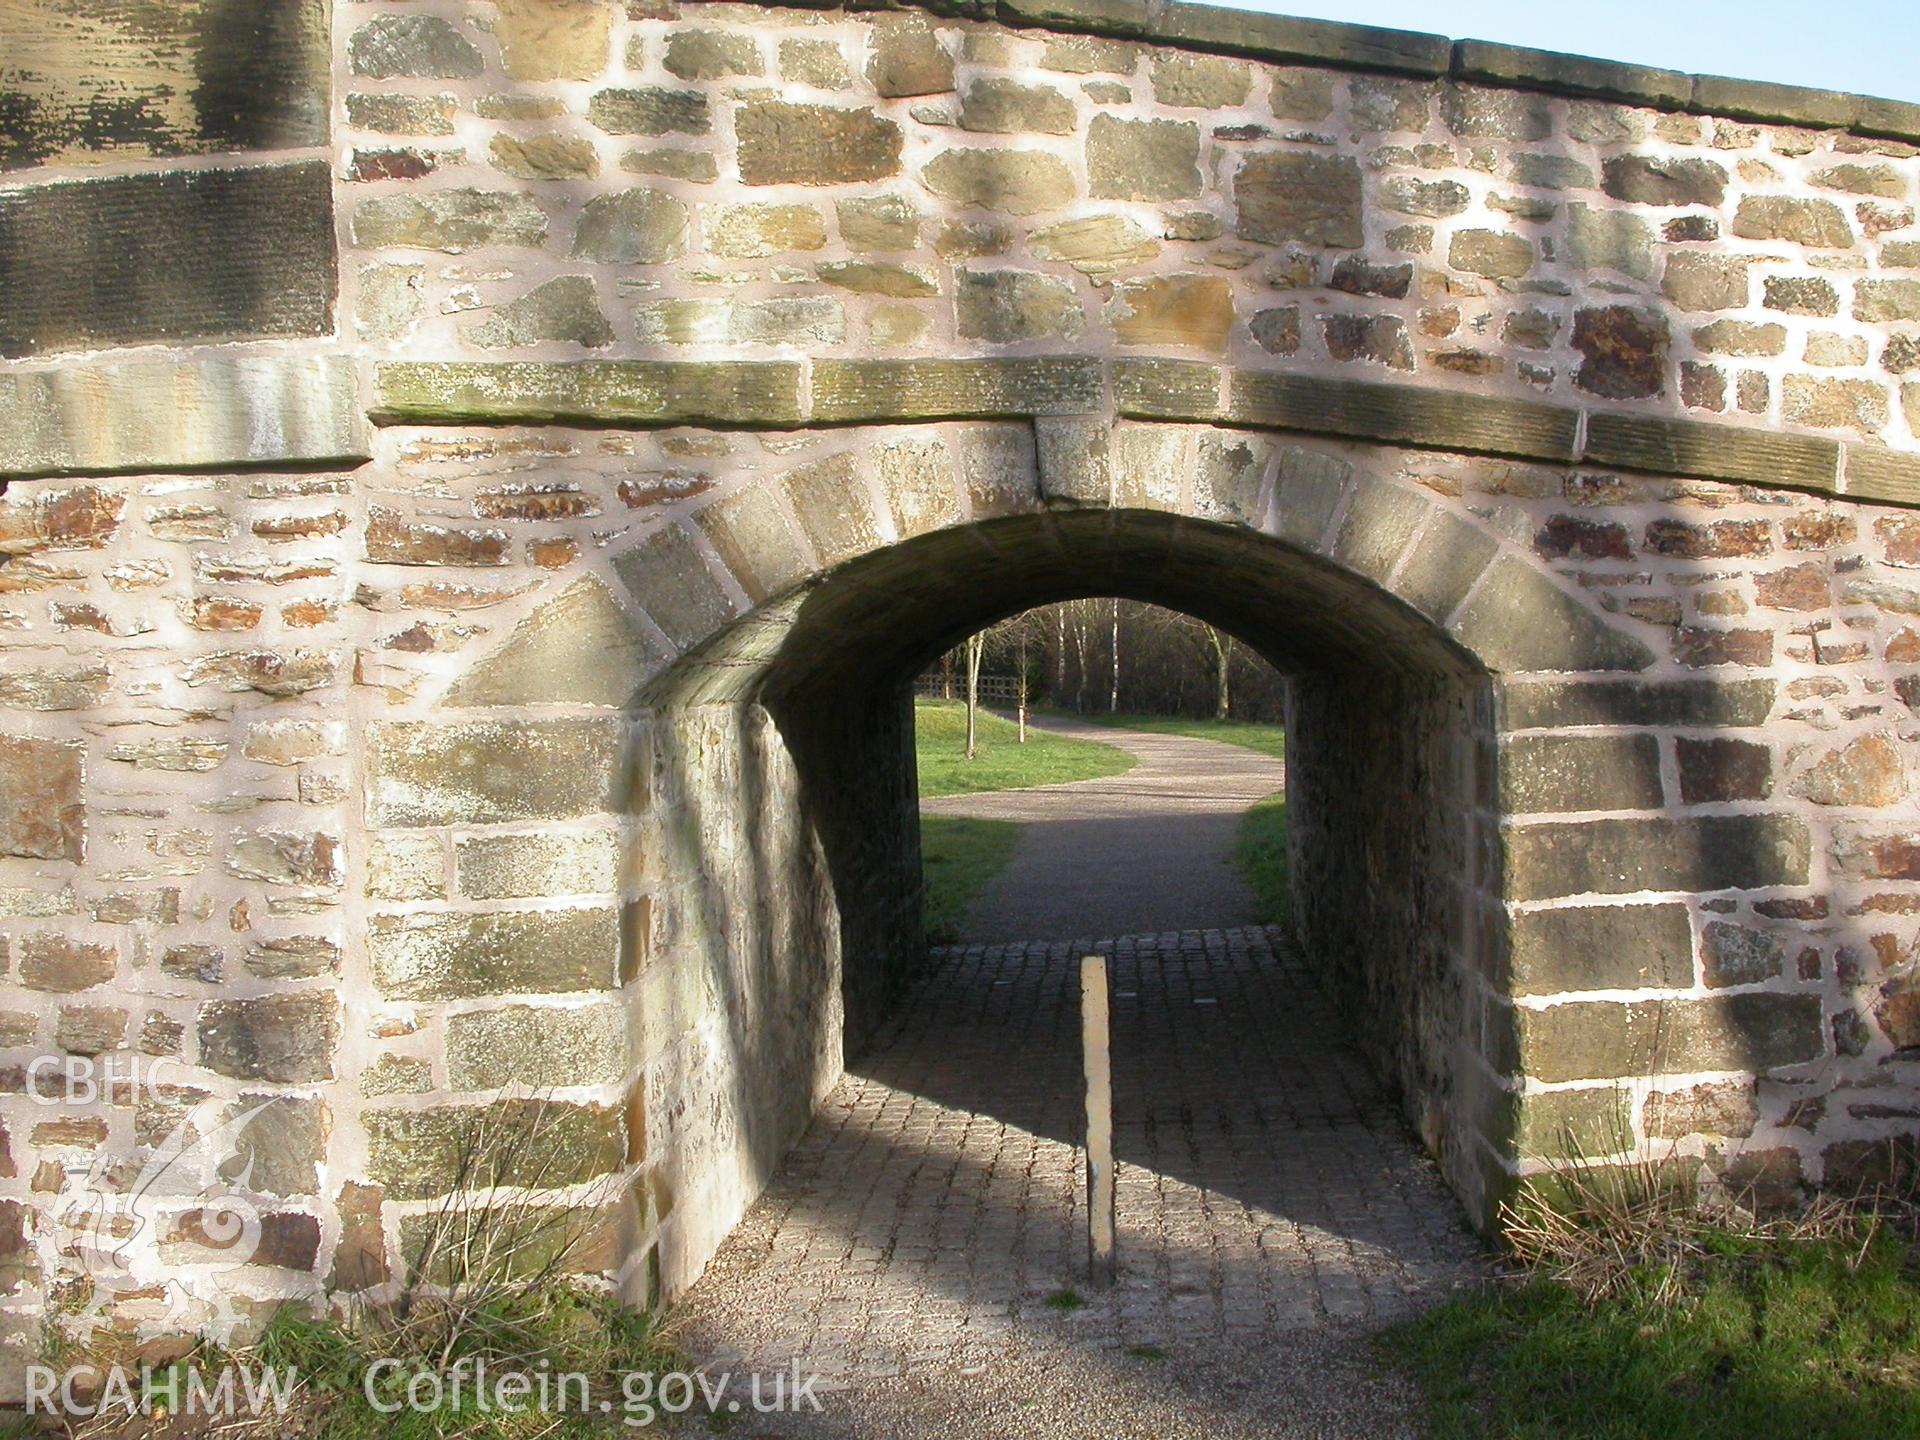 South-western elevation of pedestrian arch showing straight joint where it has been added to the main canal span to the left.